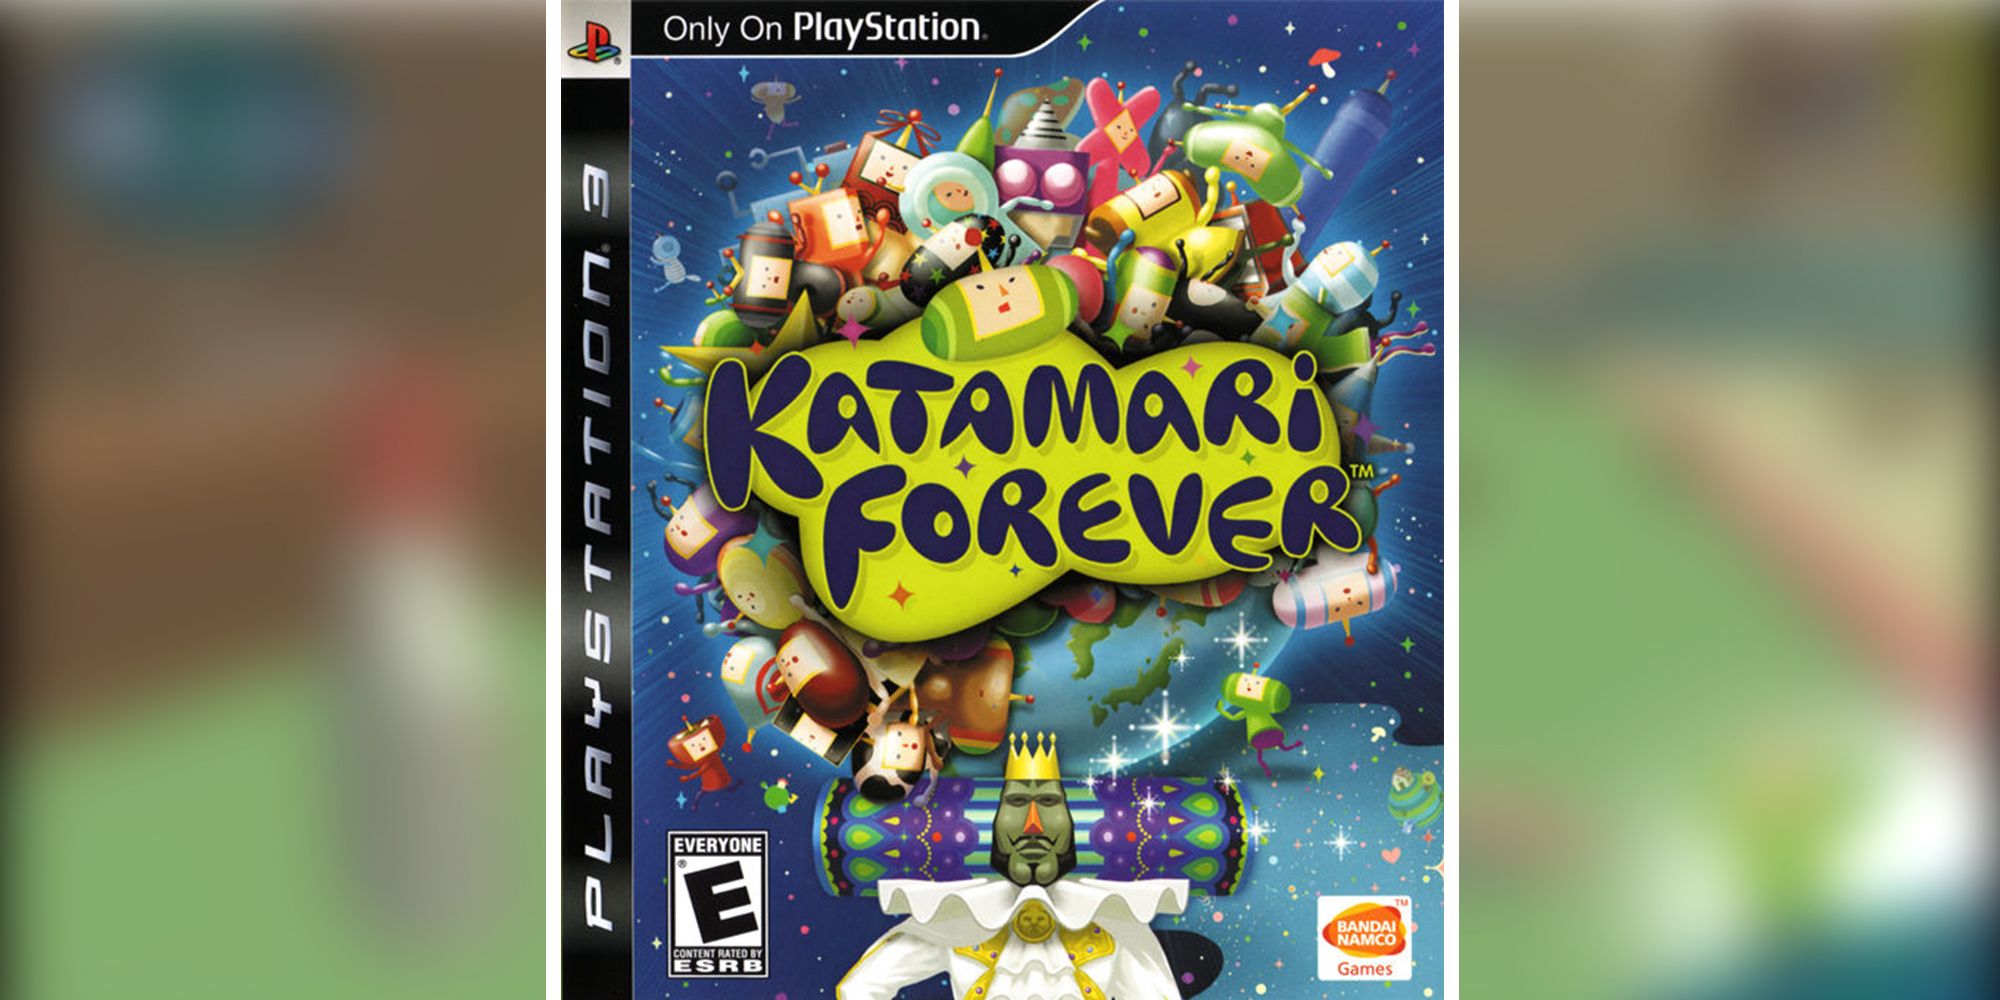 The Game Cover for PS3 Exclusive Katamari Forever (2009)